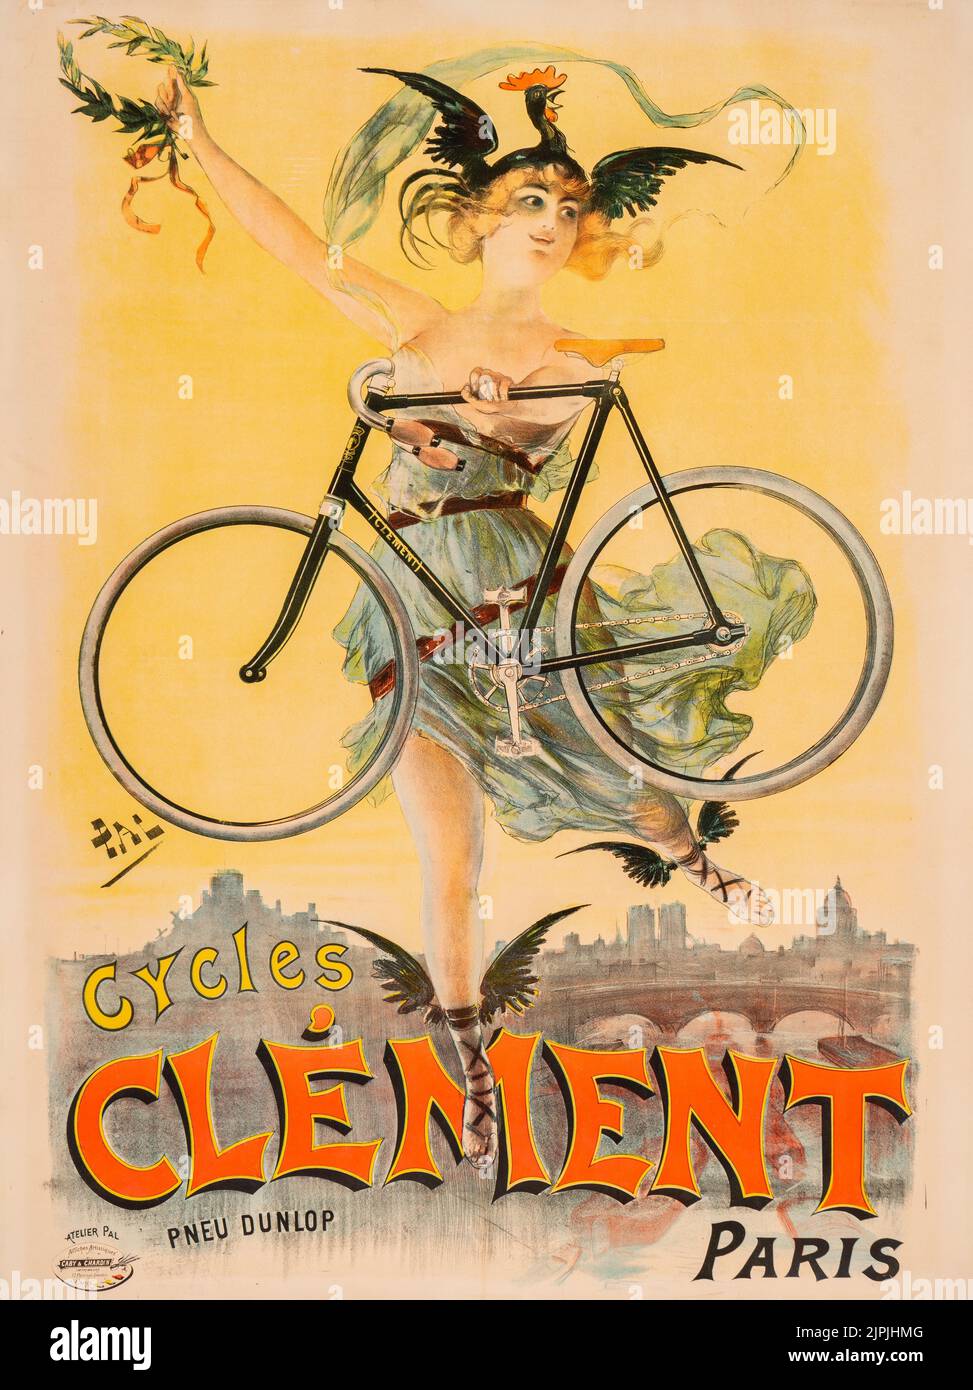 1898: Vintage French advertising bicycle poster. Cycles Clement Paris with Dunlop. PAL (Jean de Paleologue) (1860-1942) was born in Bucharest, Romania. After living in London, he moved to Paris in 1893 and was known for his posters of beautiful women. In 1900 he moved to the United States and worked in applied graphics including Vanity Fair. Later he developed ads and publicity for the automobile, film and animation industries. (Credit Image: © Vintage Posters/ZUMA Press Wire) Stock Photo